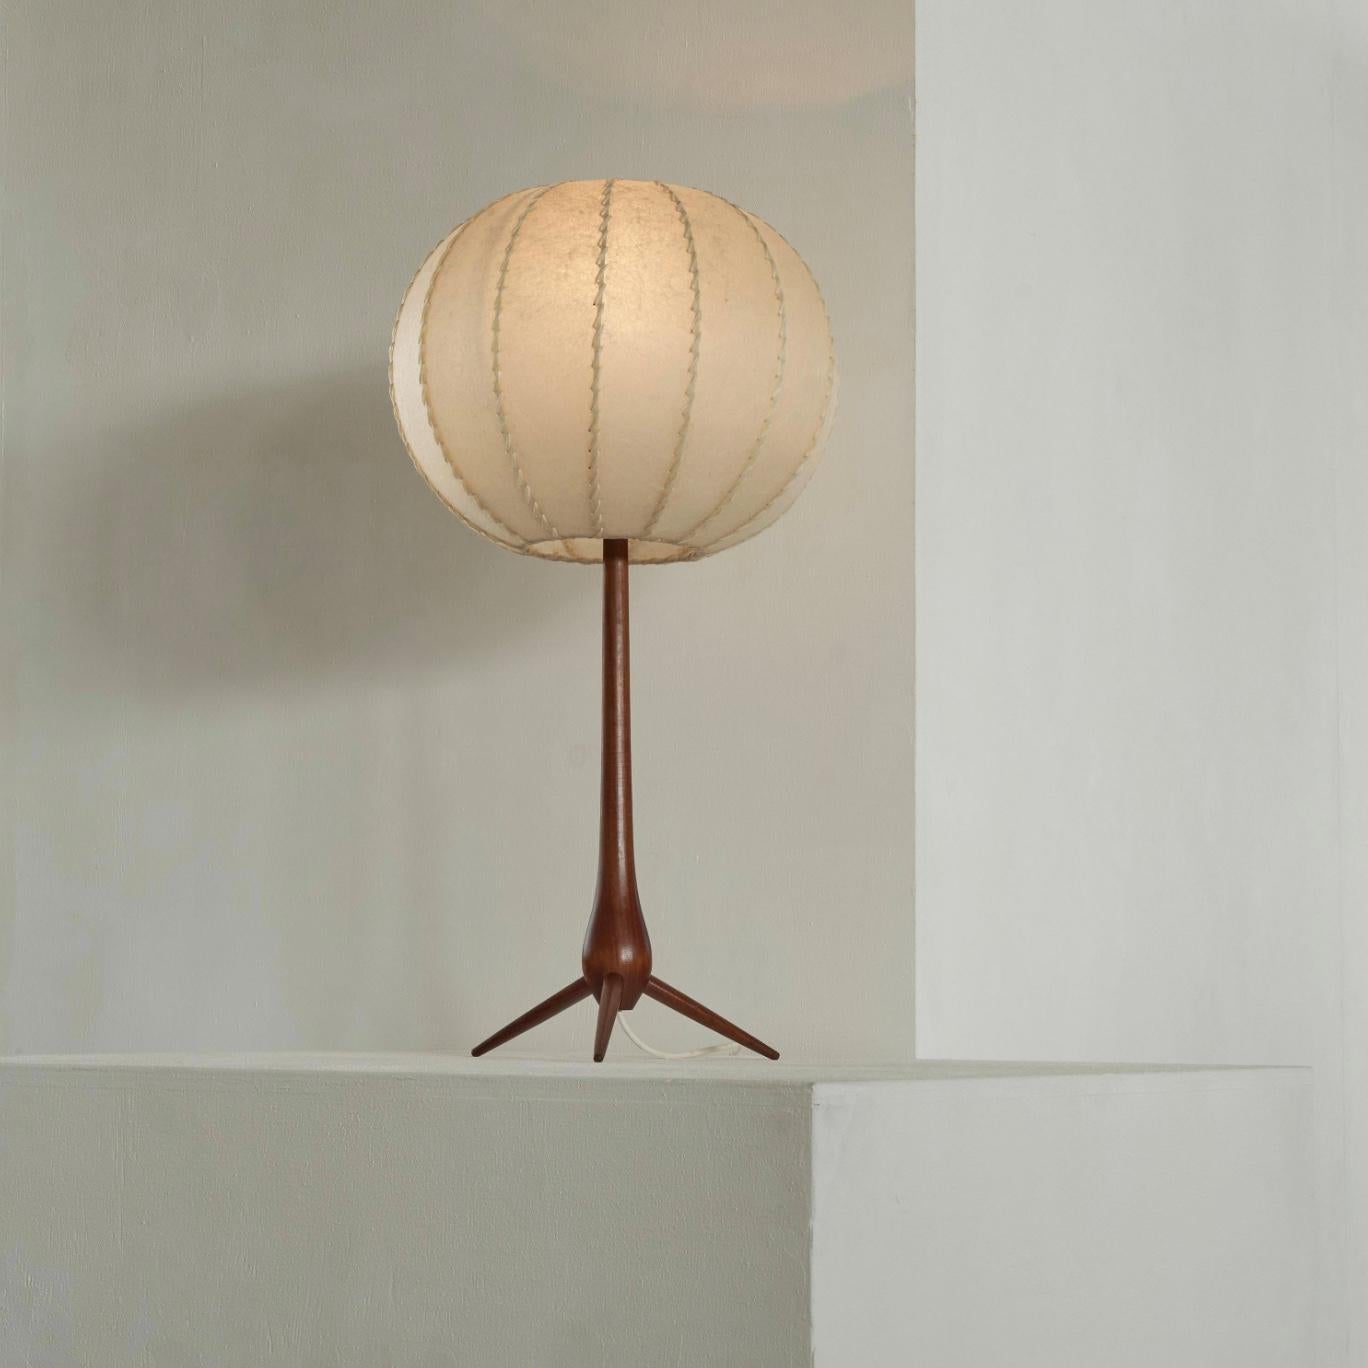 Tripod floor or table lamp in teak and parchment. most likely Denmark, 1960s.

Characteristic floor or table lamp from Scandinavia, made in solid teak and parchment. The tripod base has tapered legs that are connected to a teardrop-shaped solid teak